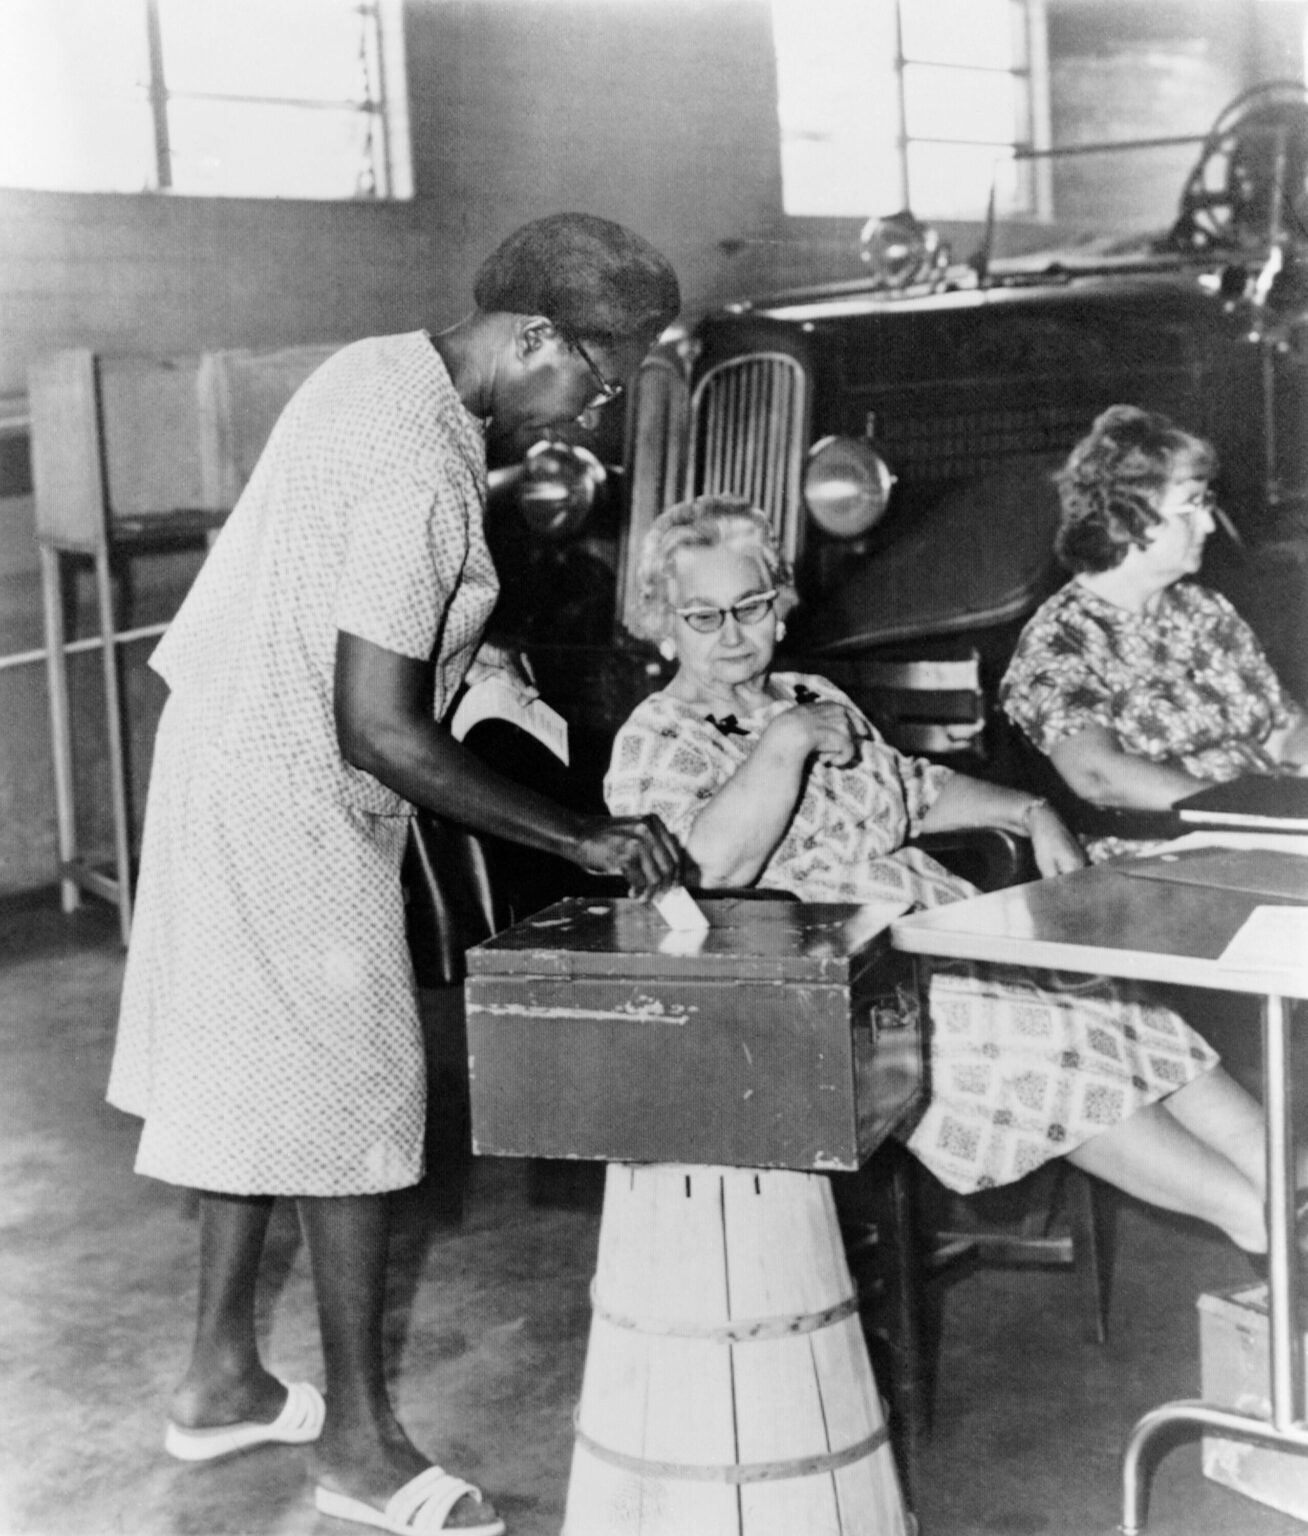 IMAGO / Everett Collection | Woman placing her ballot for the Congressional Primary Elections in Jackson, Mississippi, 1965.